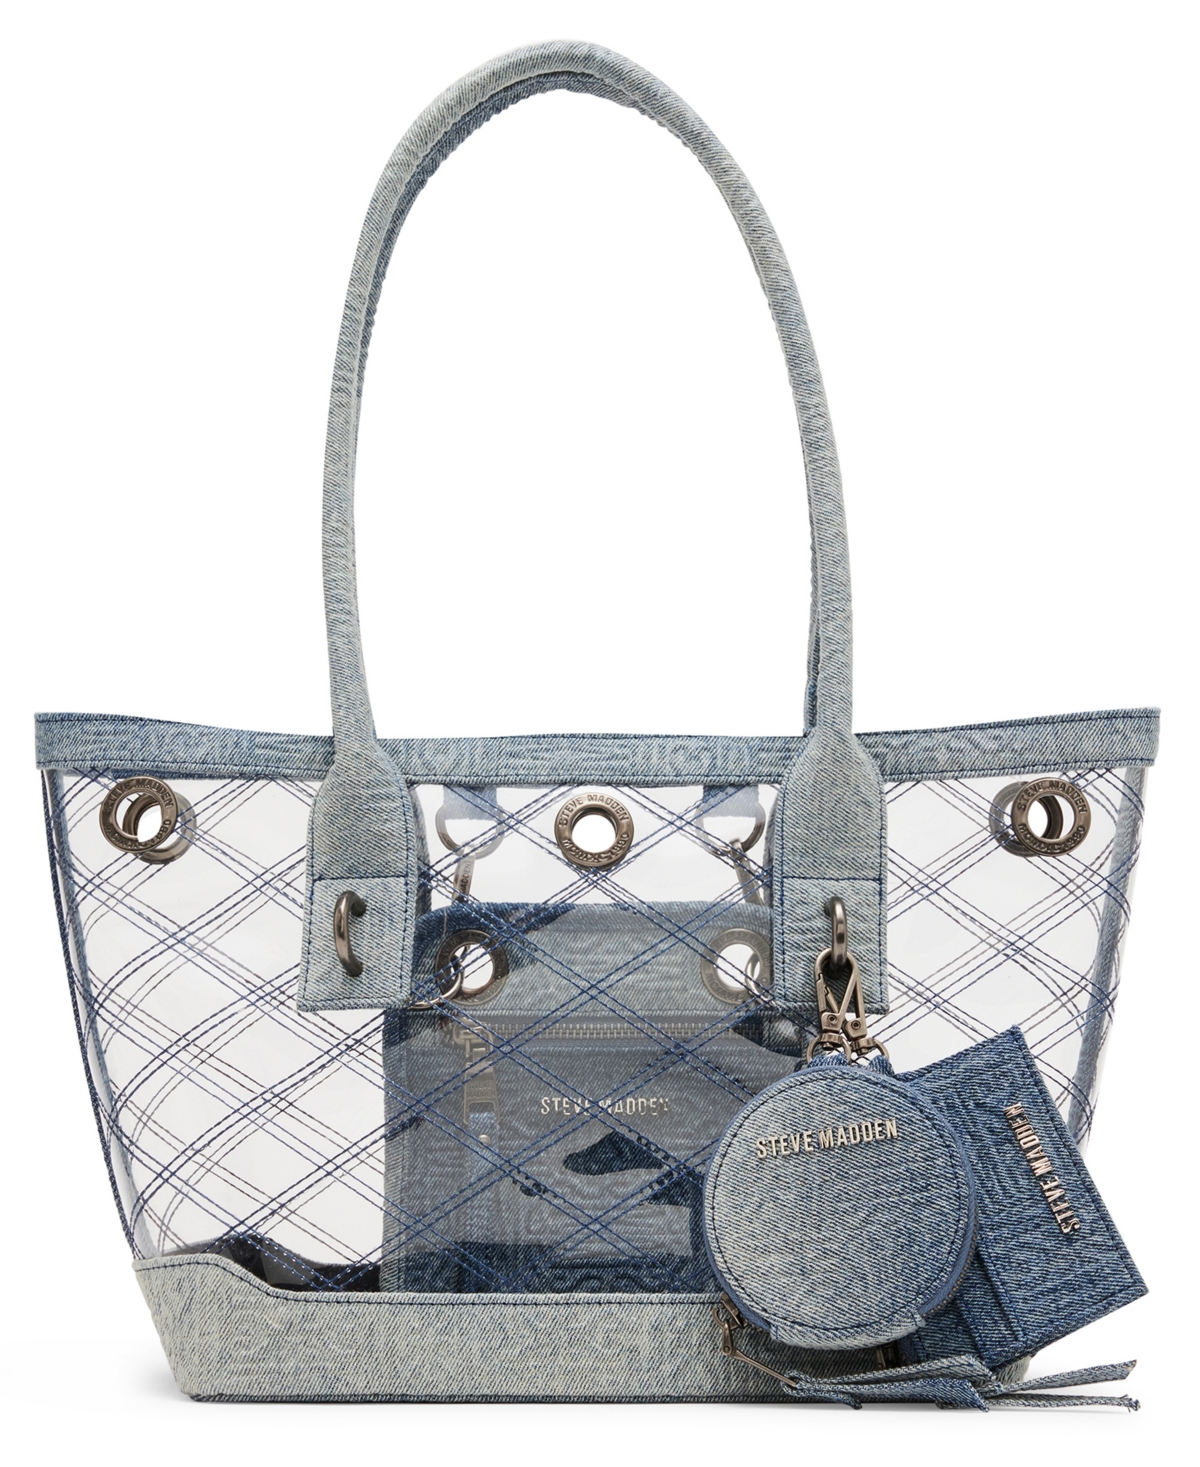 Cameron Clear Tote with Denim Trim - White